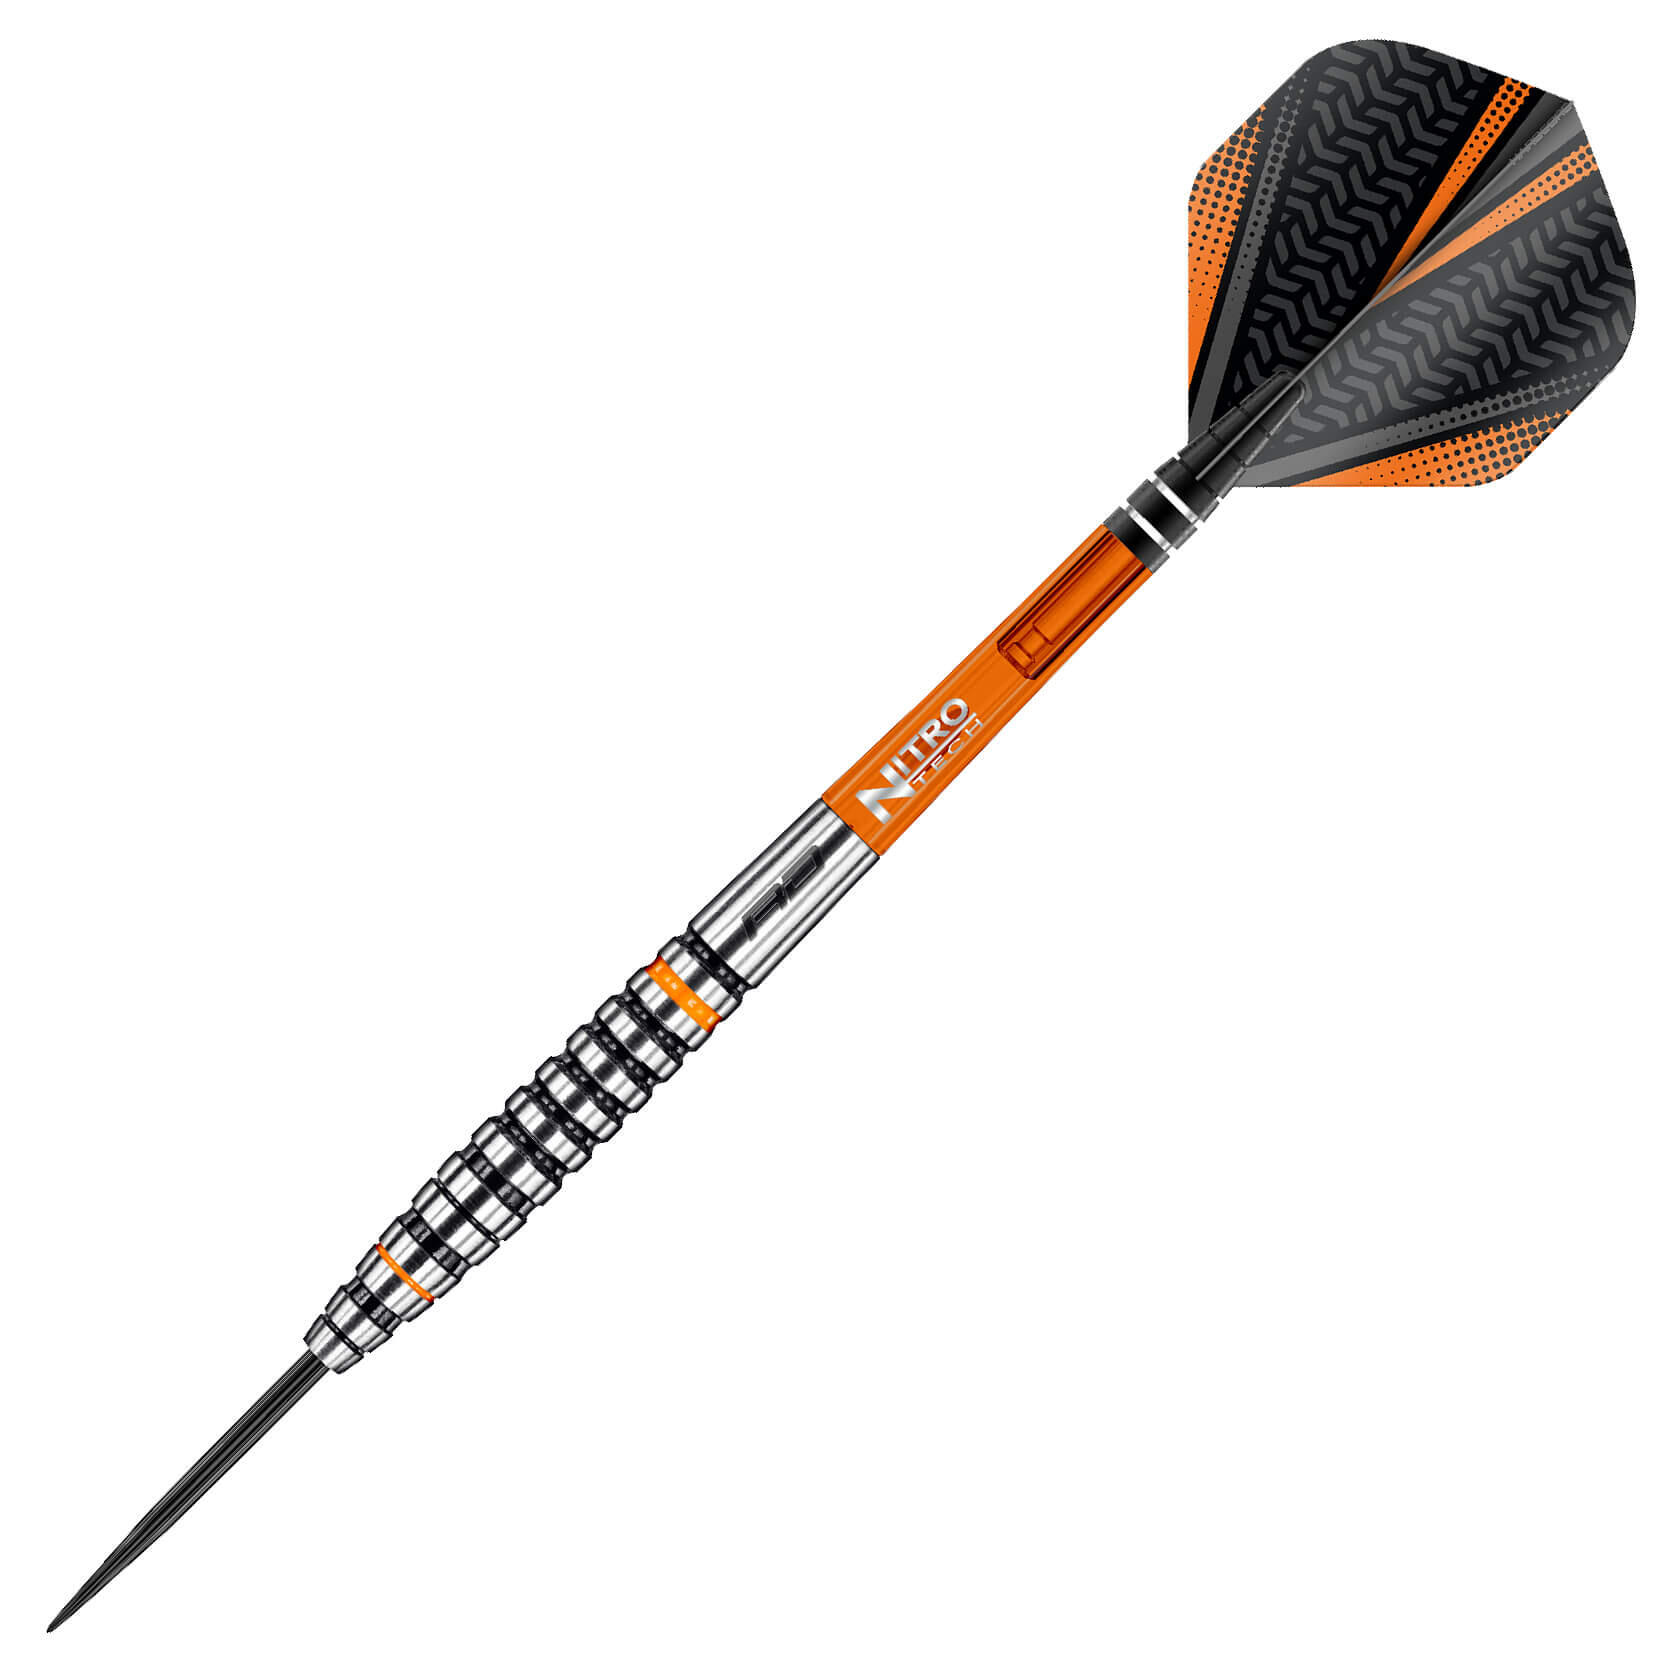 Amberjack 14: 23g Tungsten Darts Set with Flights and Stems 2/5